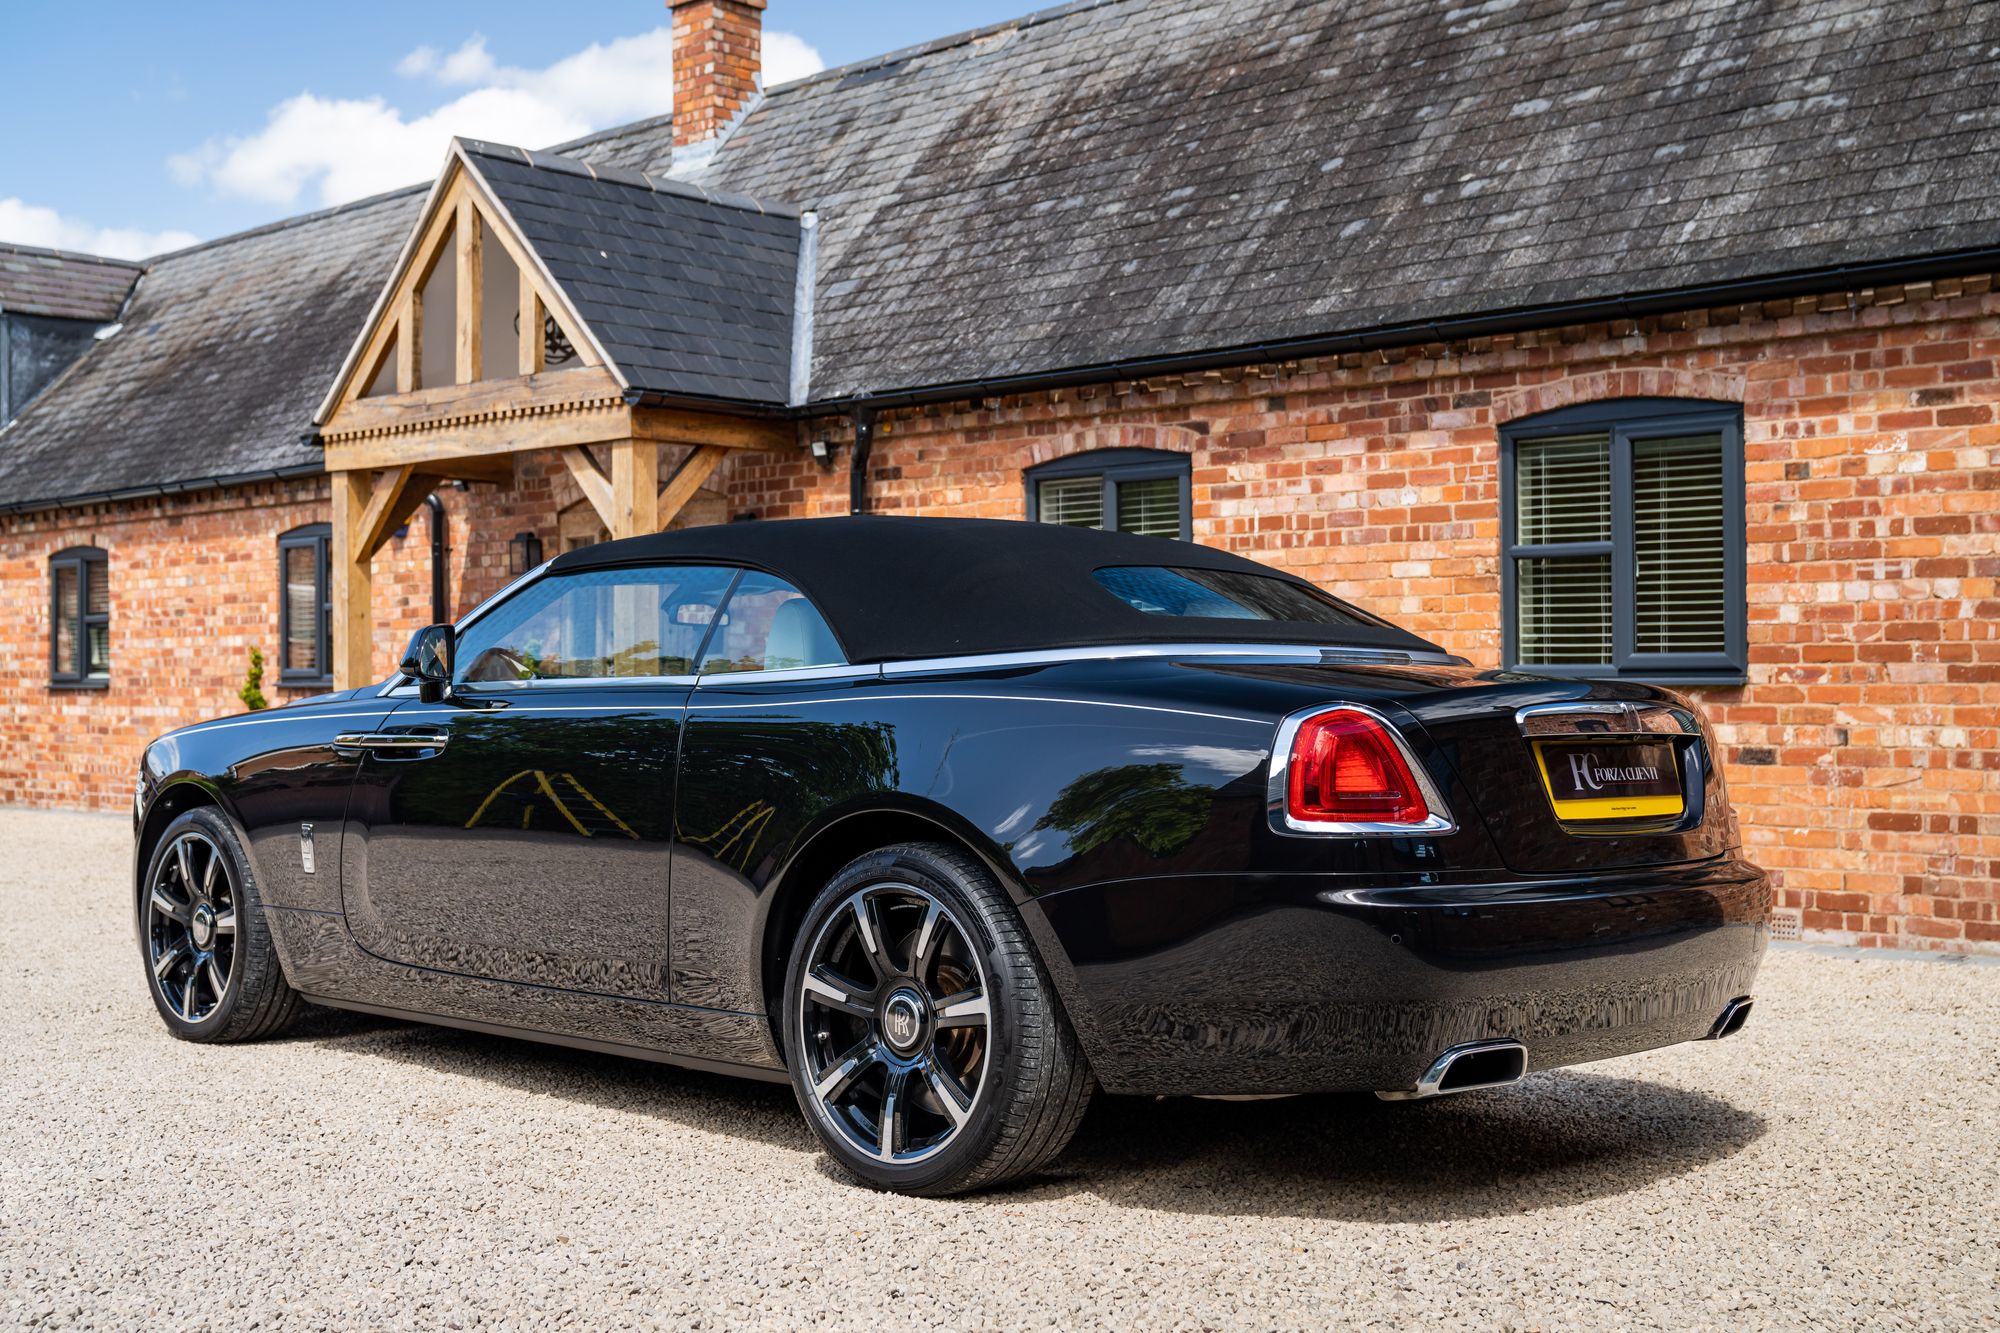 2018 Rolls Royce Dawn "Inspired By Music" Edition for sale